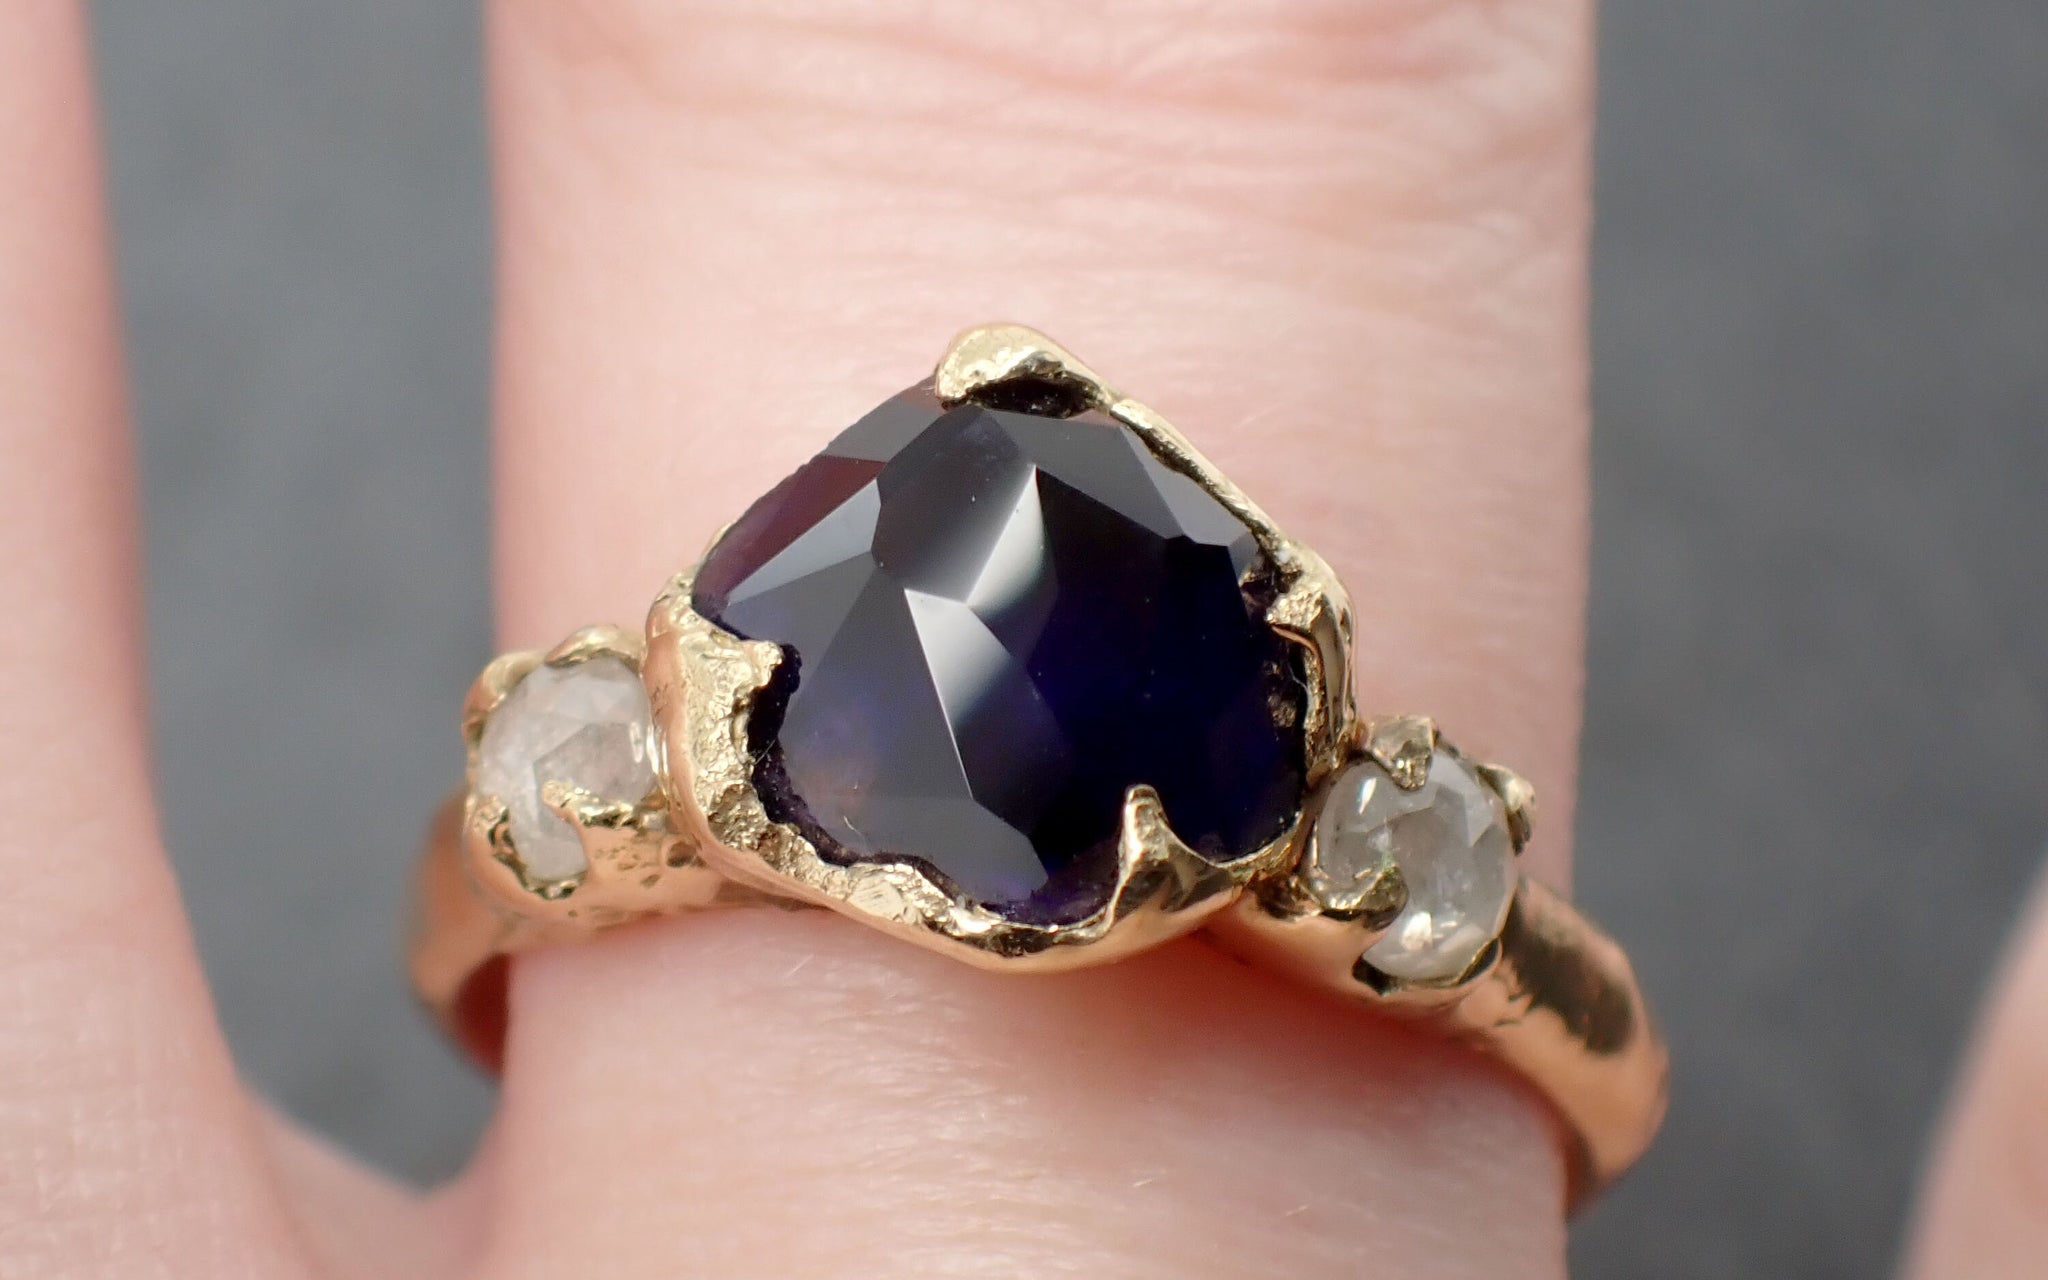 Partially Faceted ultra violet Sapphire 18k Yellow gold Multi Stone Gemstone Engagement Ring 3451